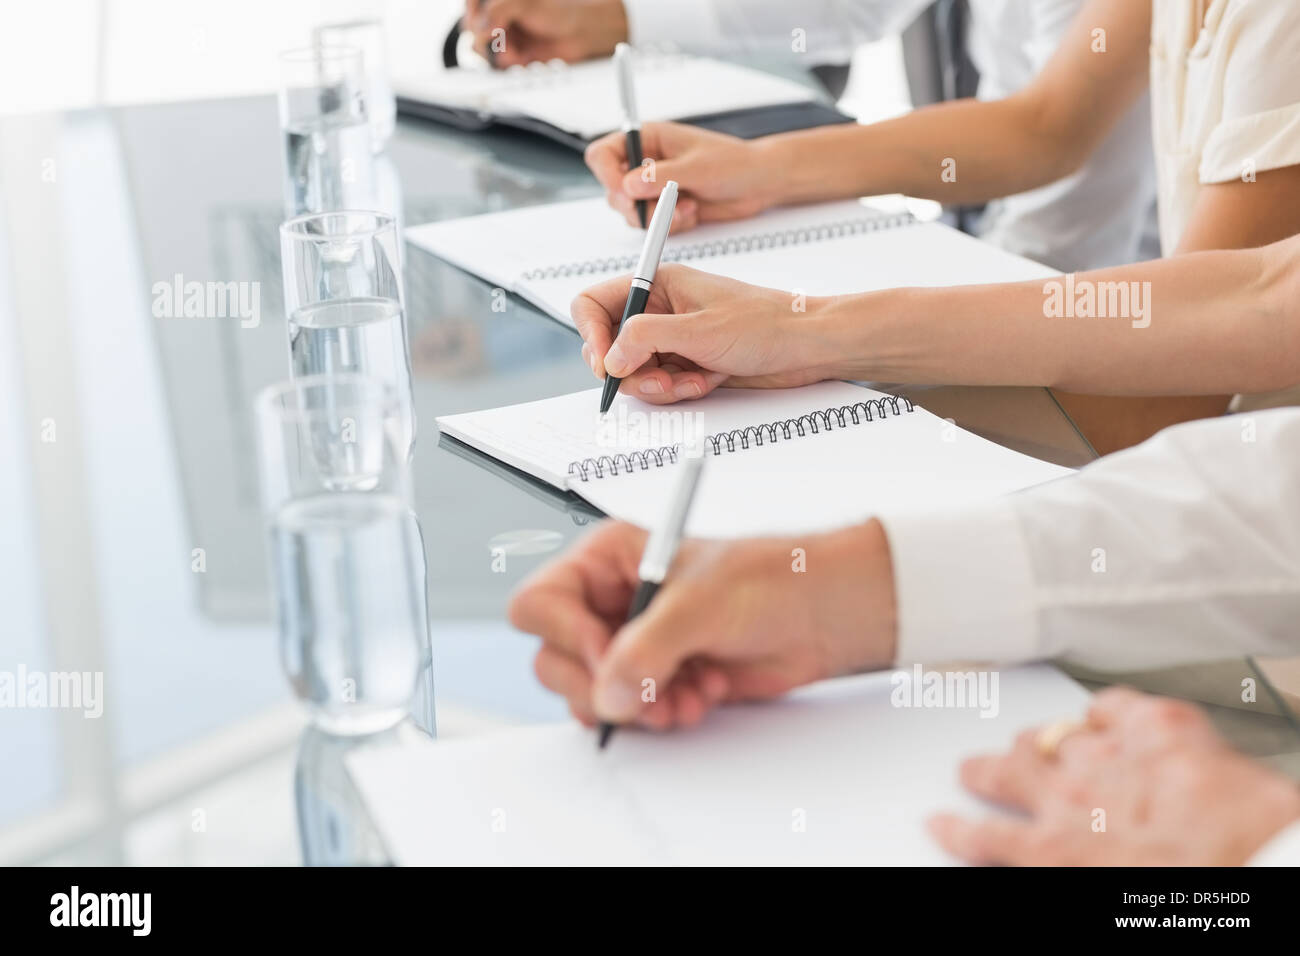 Business people taking down notes at a meeting Stock Photo